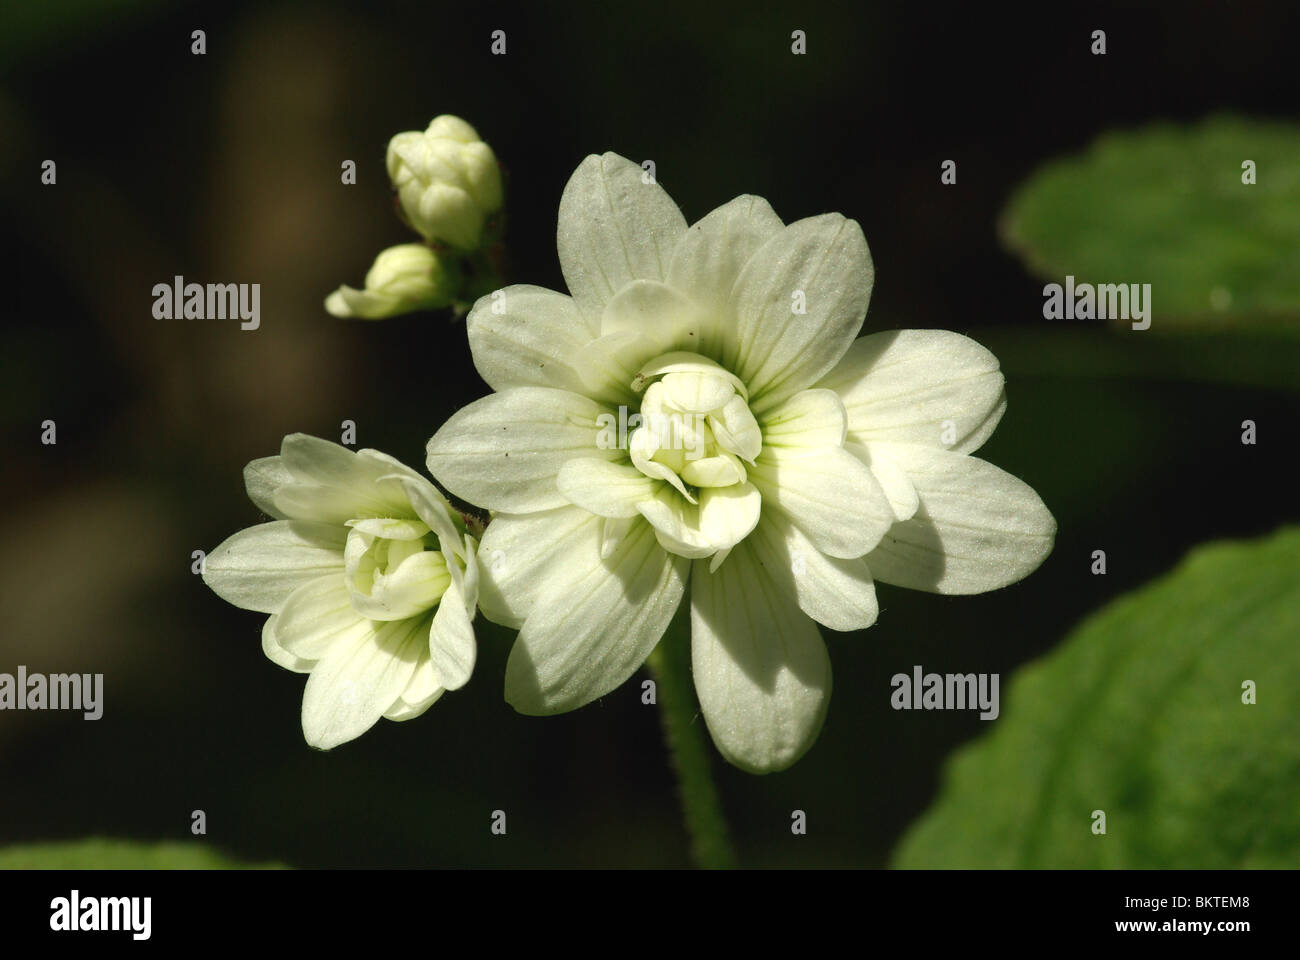 Saxifraga granulata var. plena is the cultivated form of the Meadow Saxifrage Stock Photo